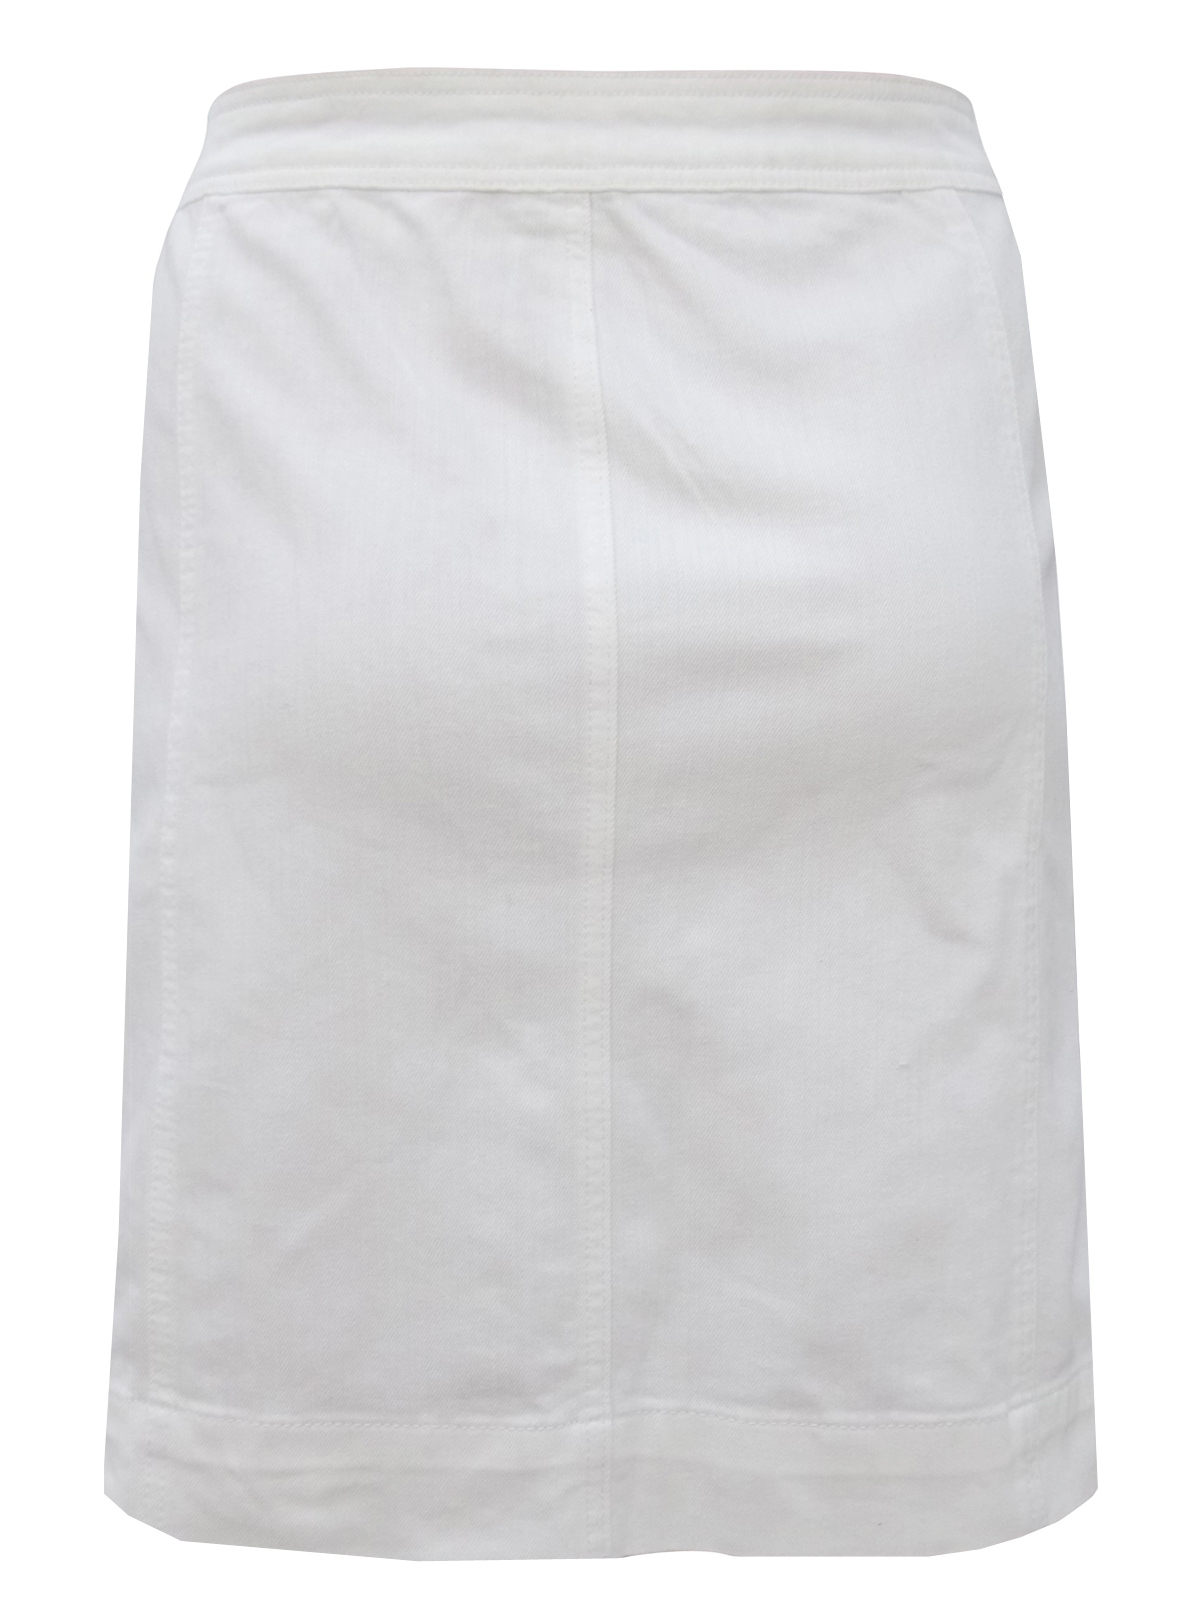 Marks and Spencer - - M&5 WHITE Button Through Denim Skirt - Size 20 to 22